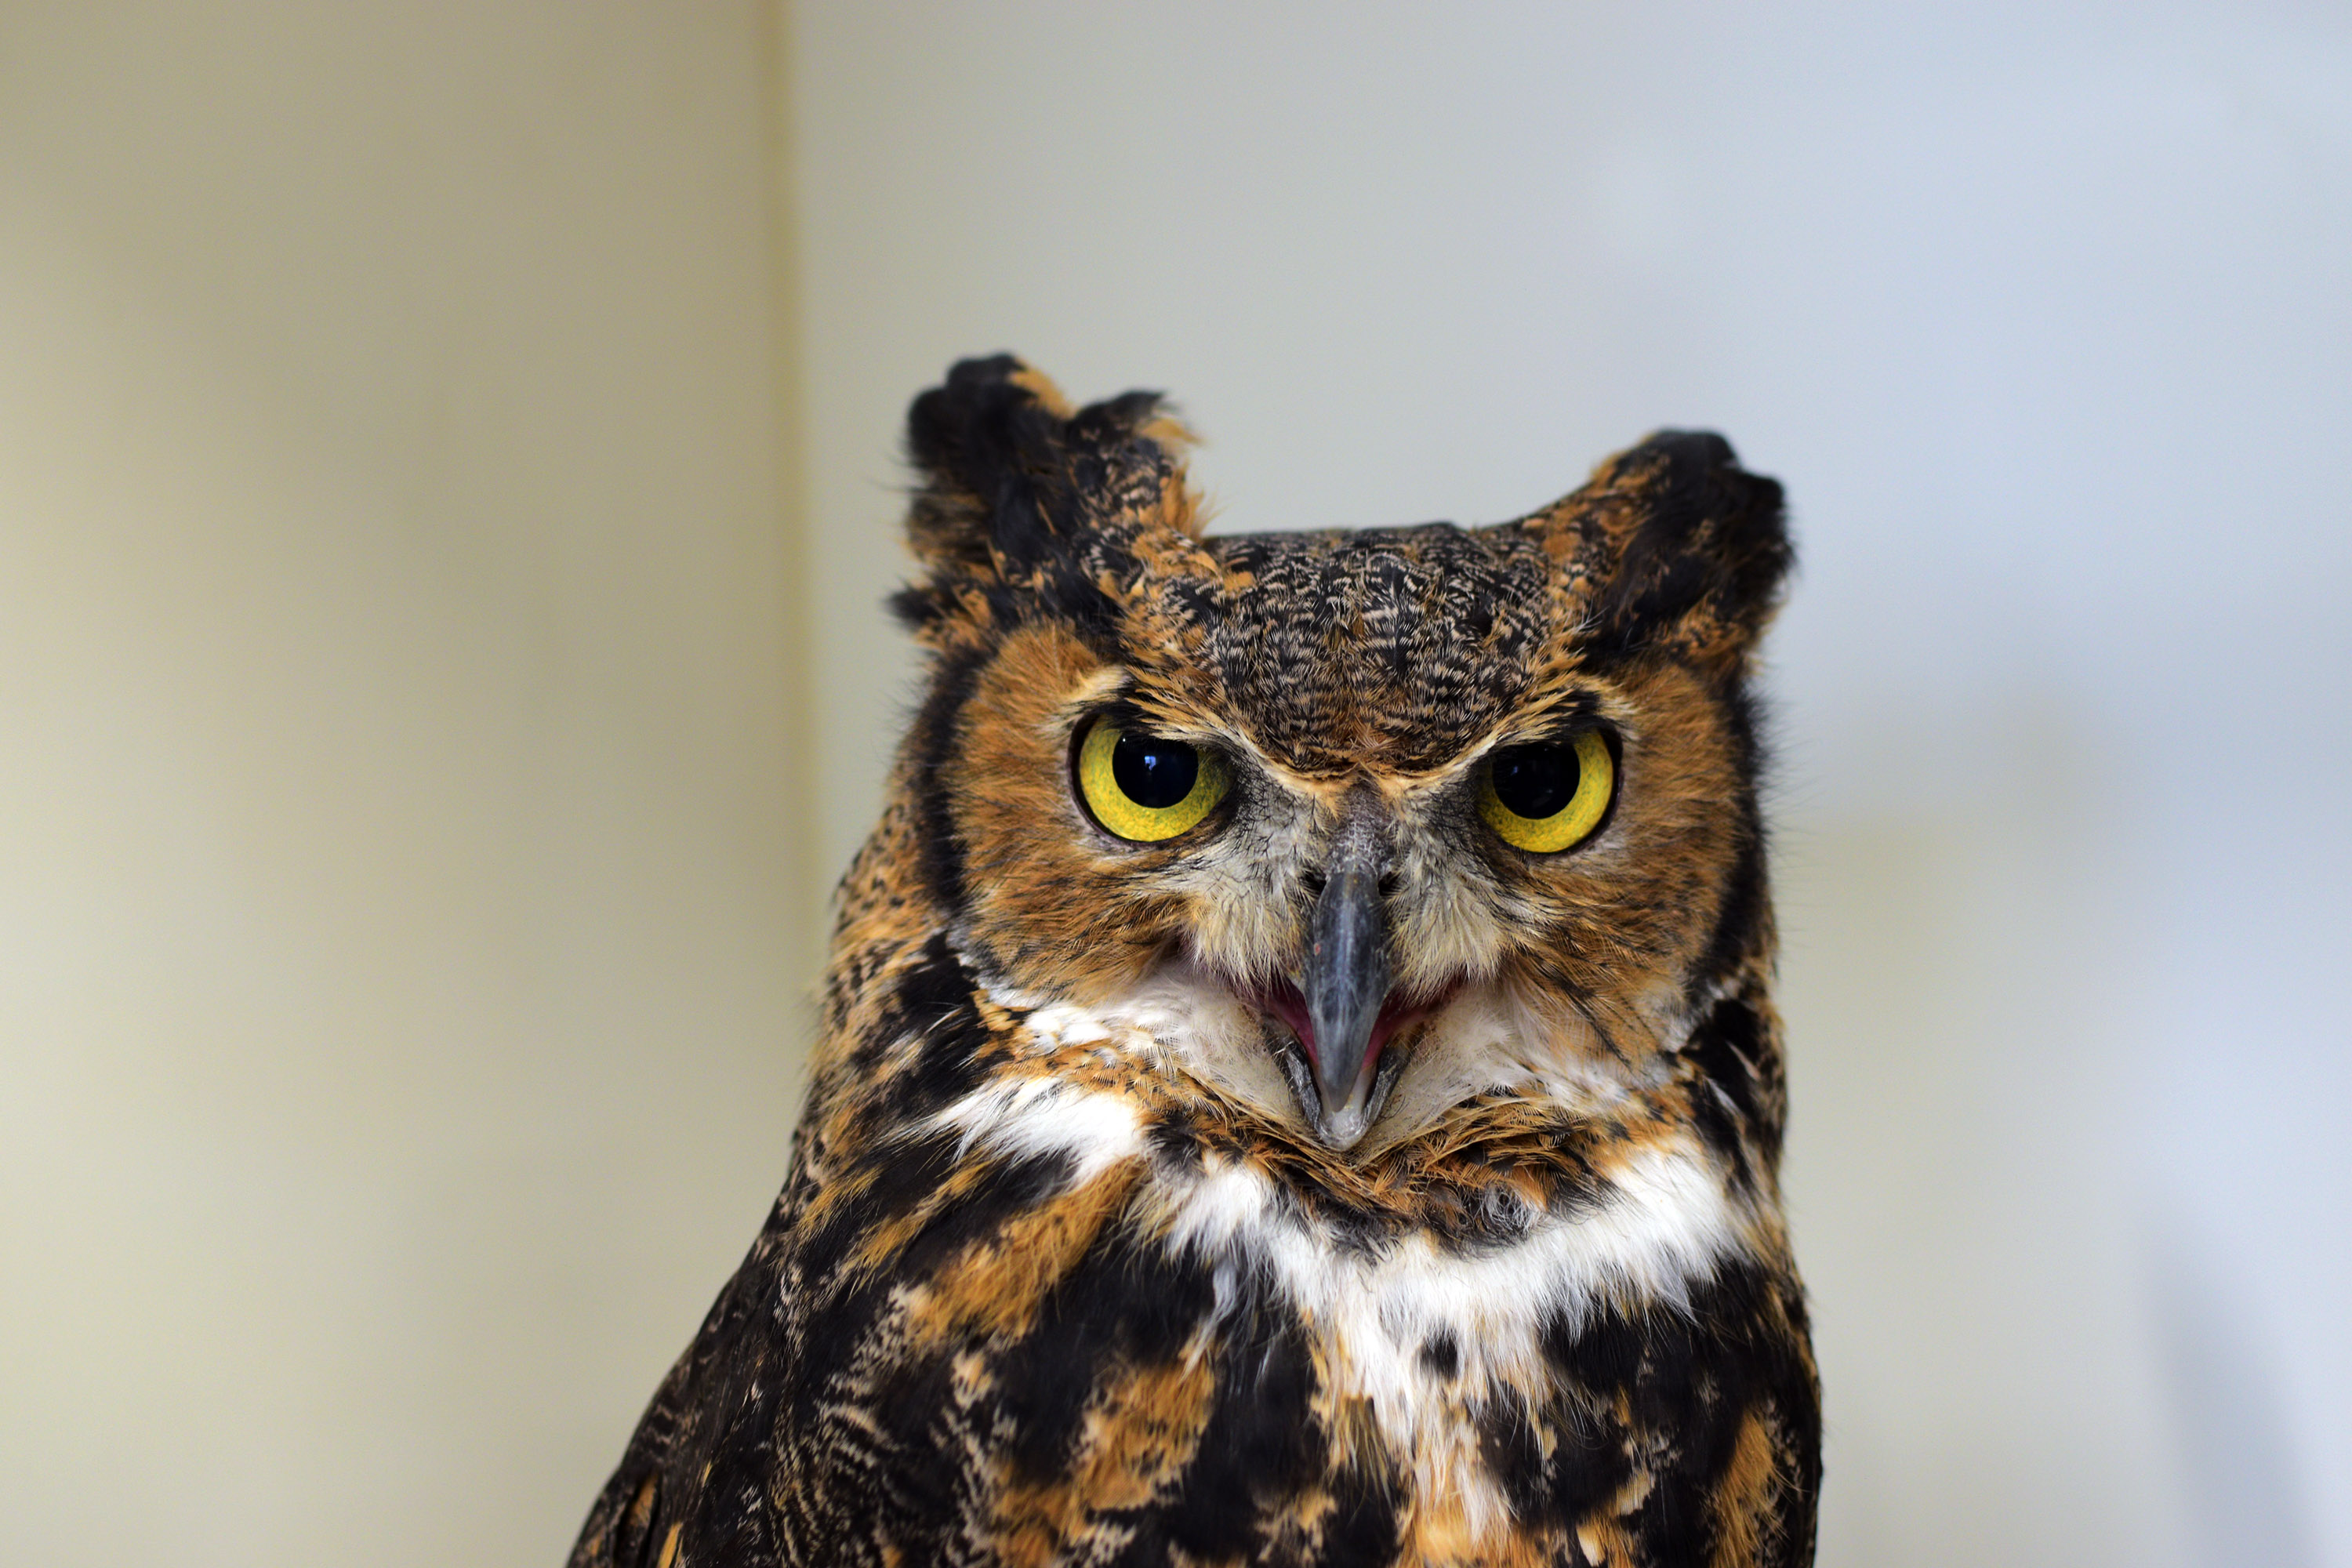 Starry, a great horned owl at Wildside Rehabilitation